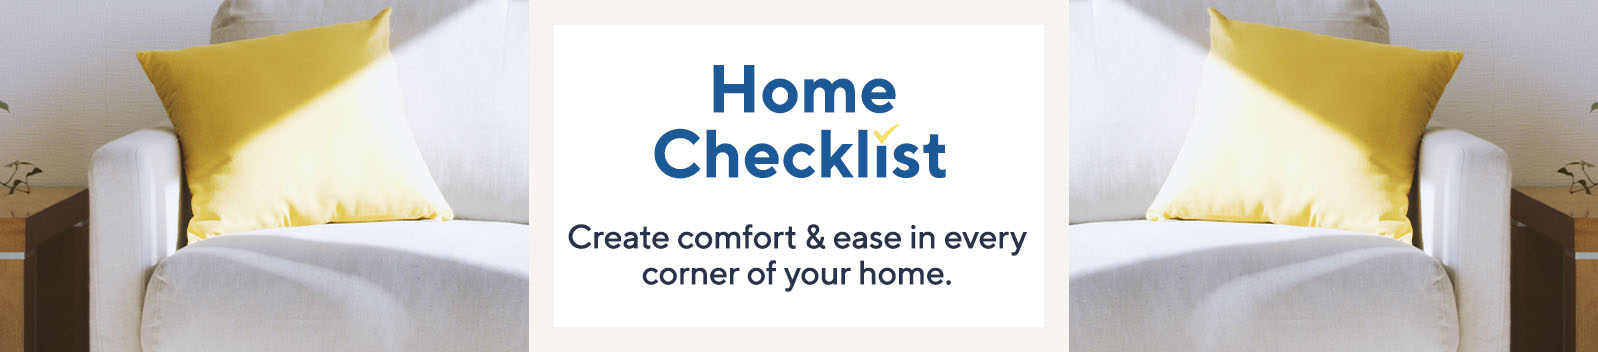 Home Checklist. Create comfort & ease in every corner of your home. 